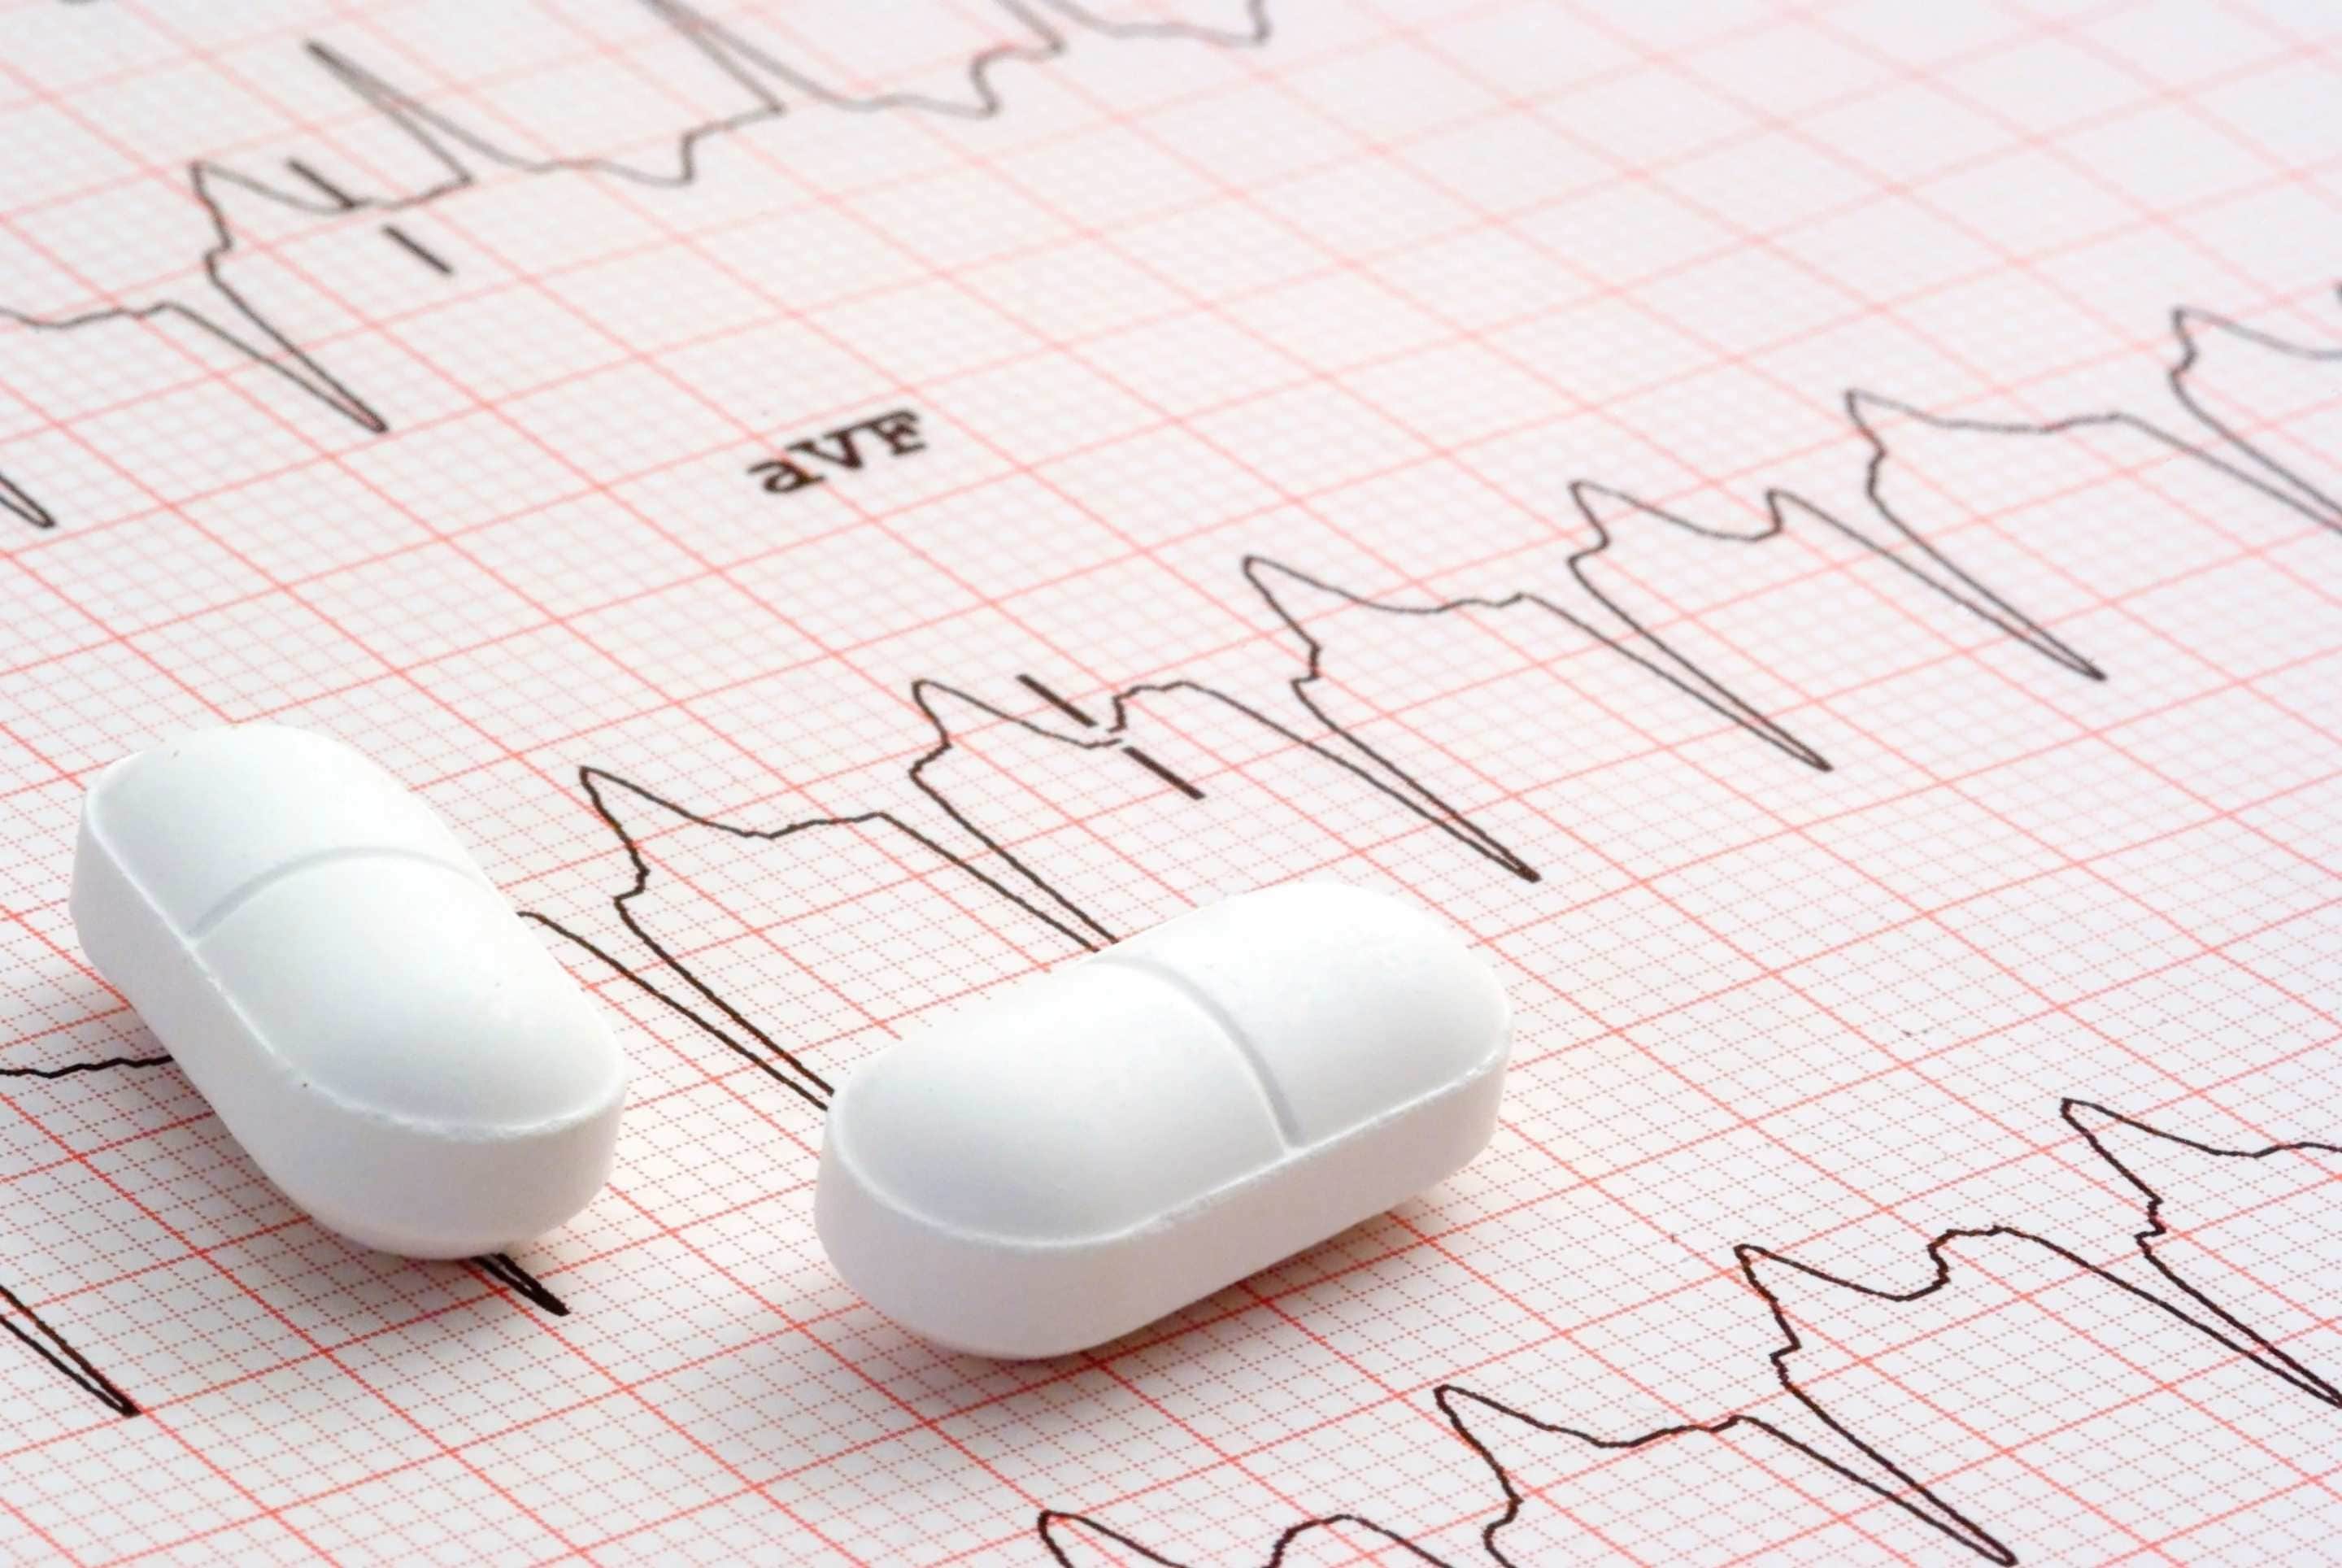 Image of cardiology graph and pharmaceutical pills